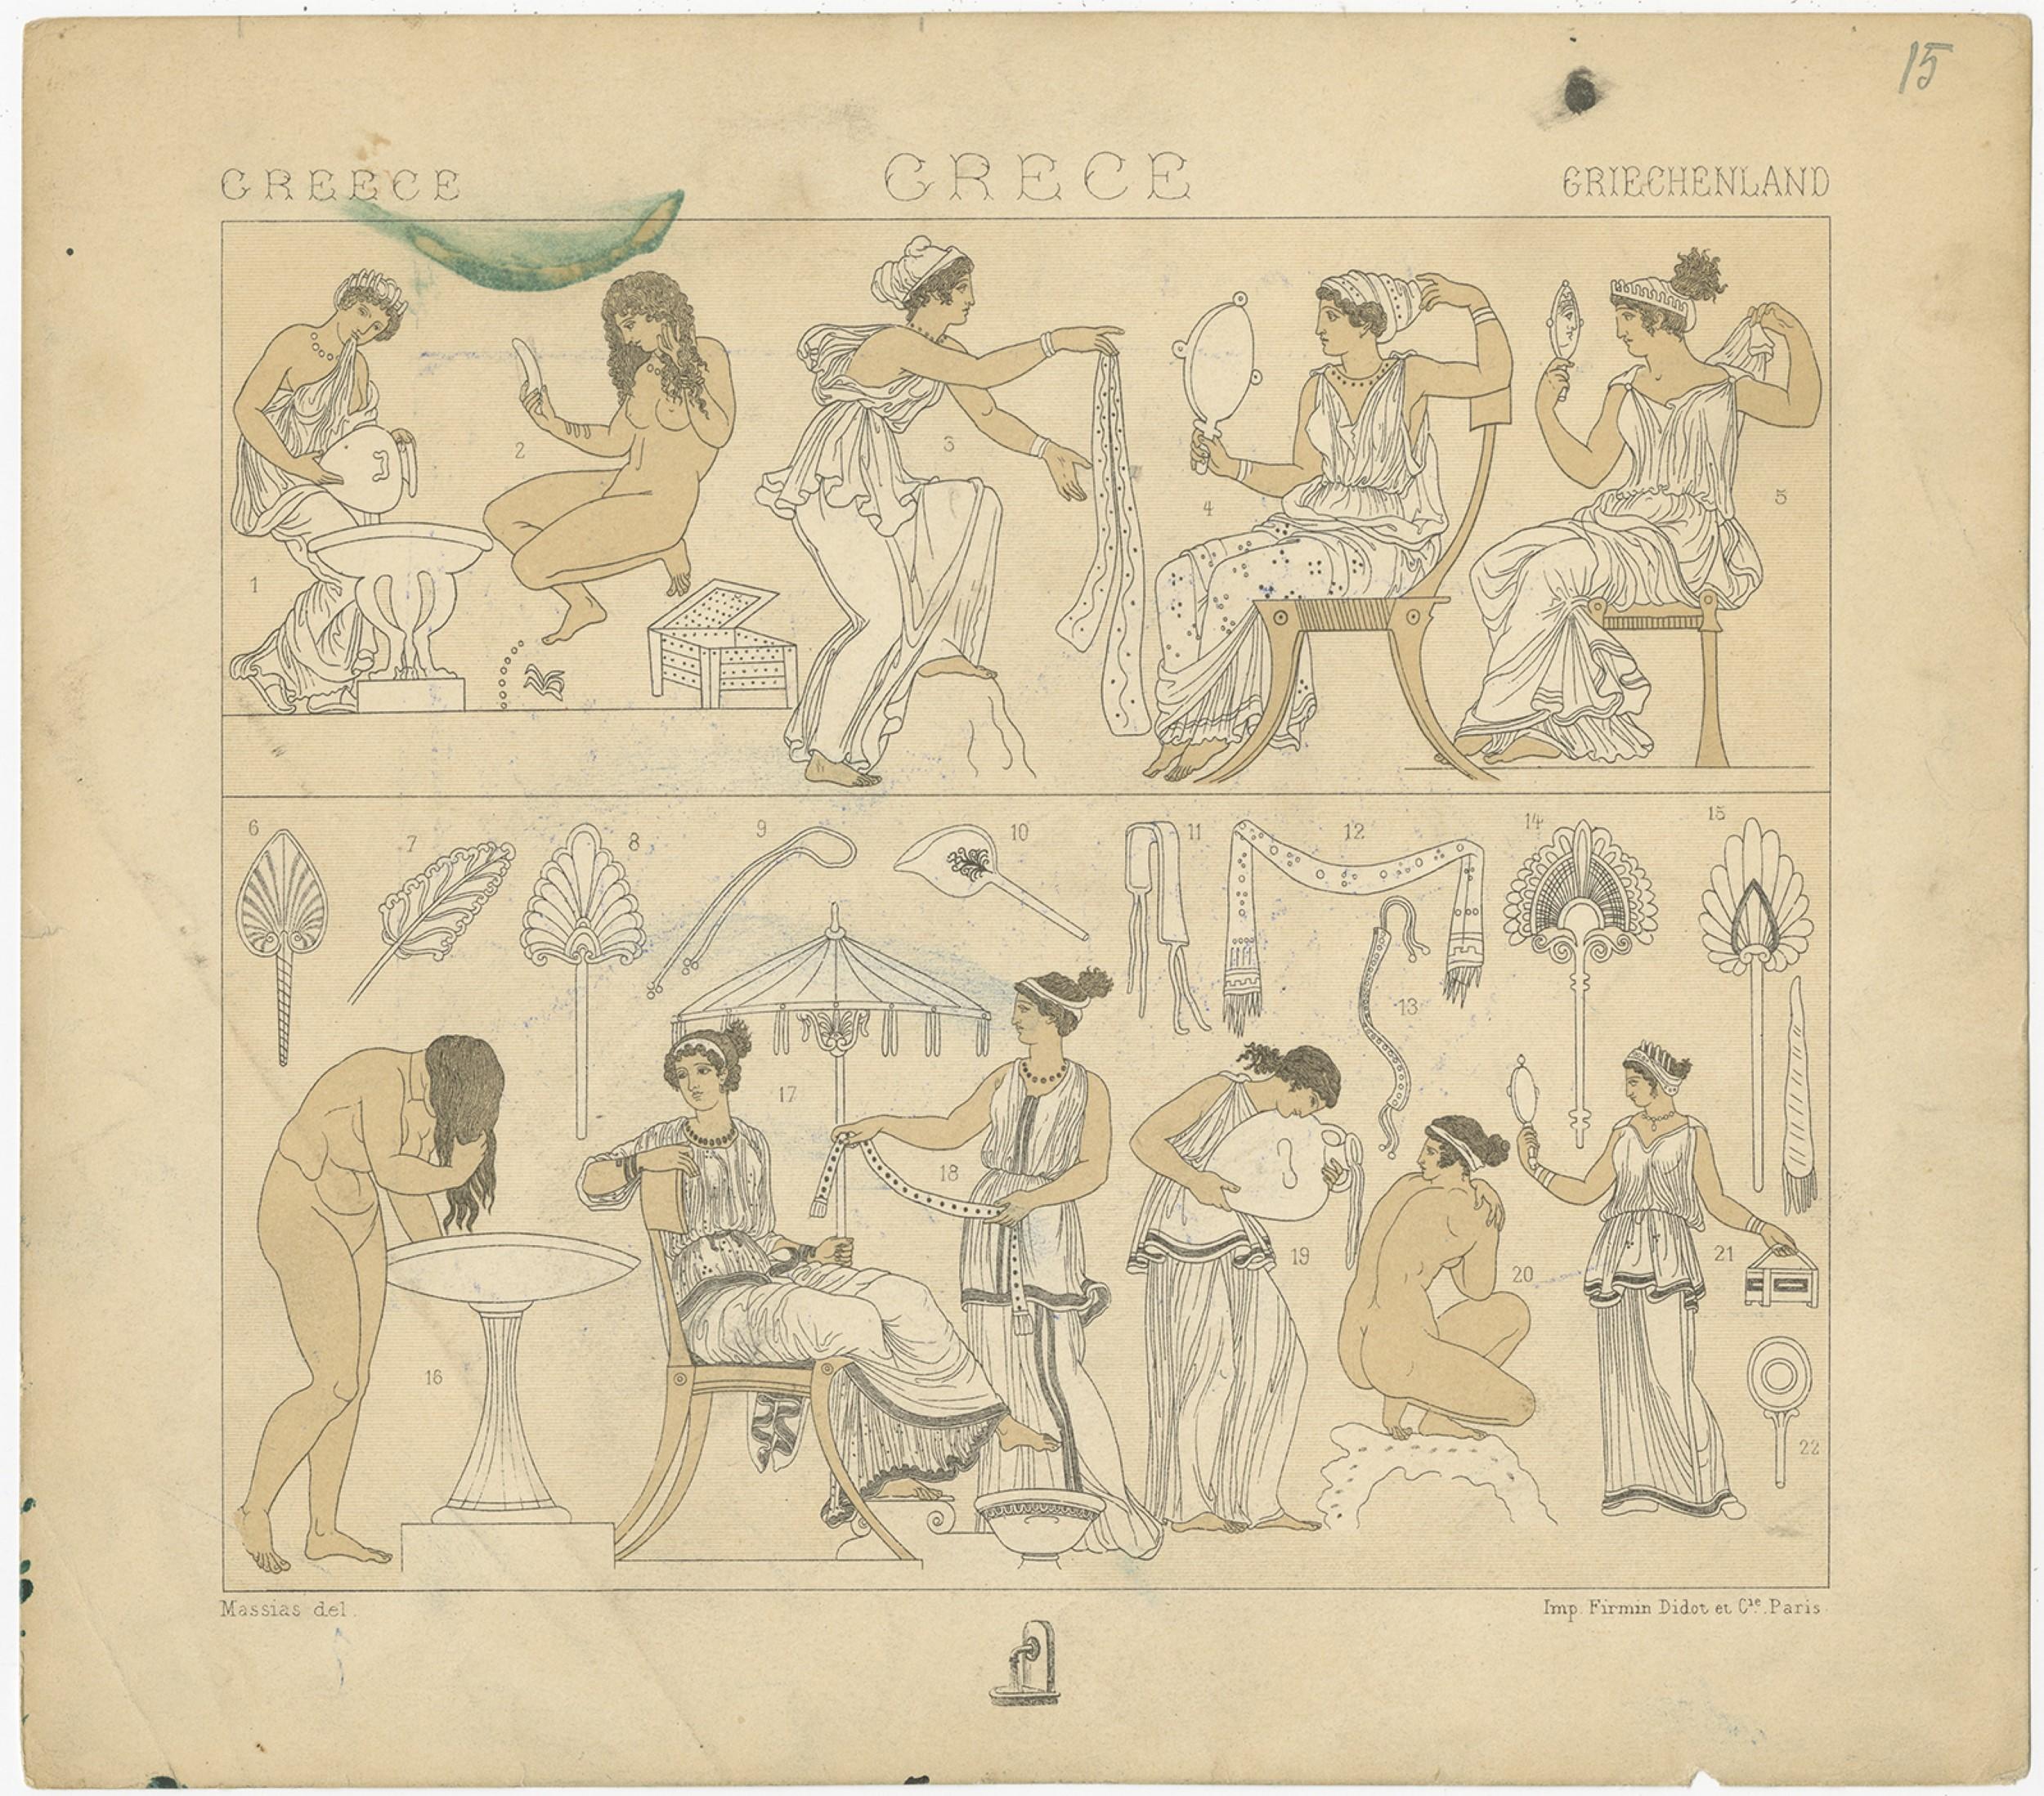 Antique print titled 'Greece - Grece - Griechenland'. Chromolithograph of Greece bathroom scenes. This print originates from 'Le Costume Historique' by M.A. Racinet. Published, circa 1880.